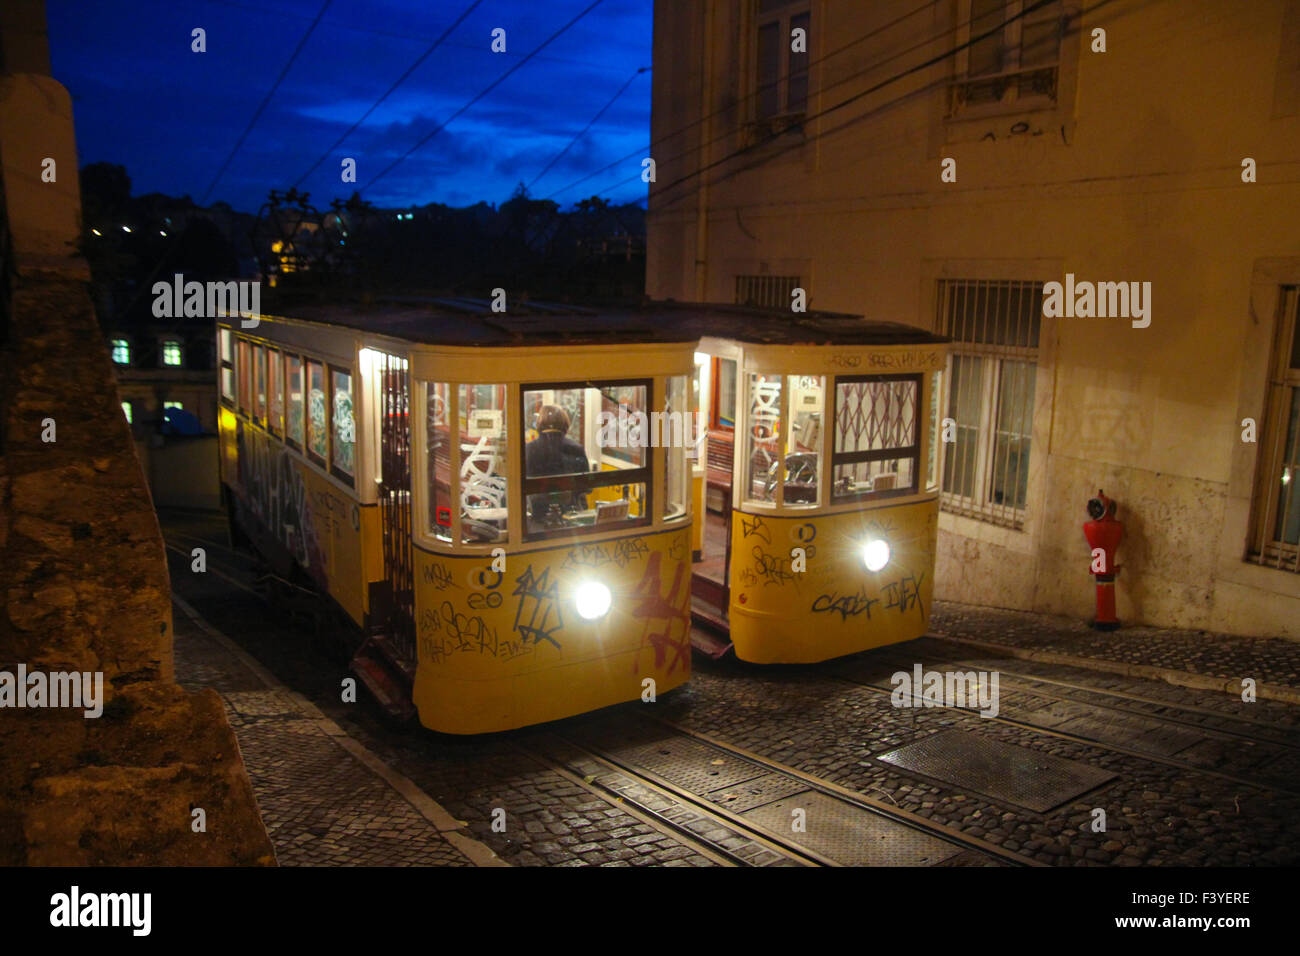 Lisbon, Portugal, 5 October, 2015. A Glória Funicular which links Restauradores Square with Bairro Alto seen on its first journey of the day along the 265 metres long route just after sunrise. Credit: David Mbiyu/ Alamy Live News Stock Photo